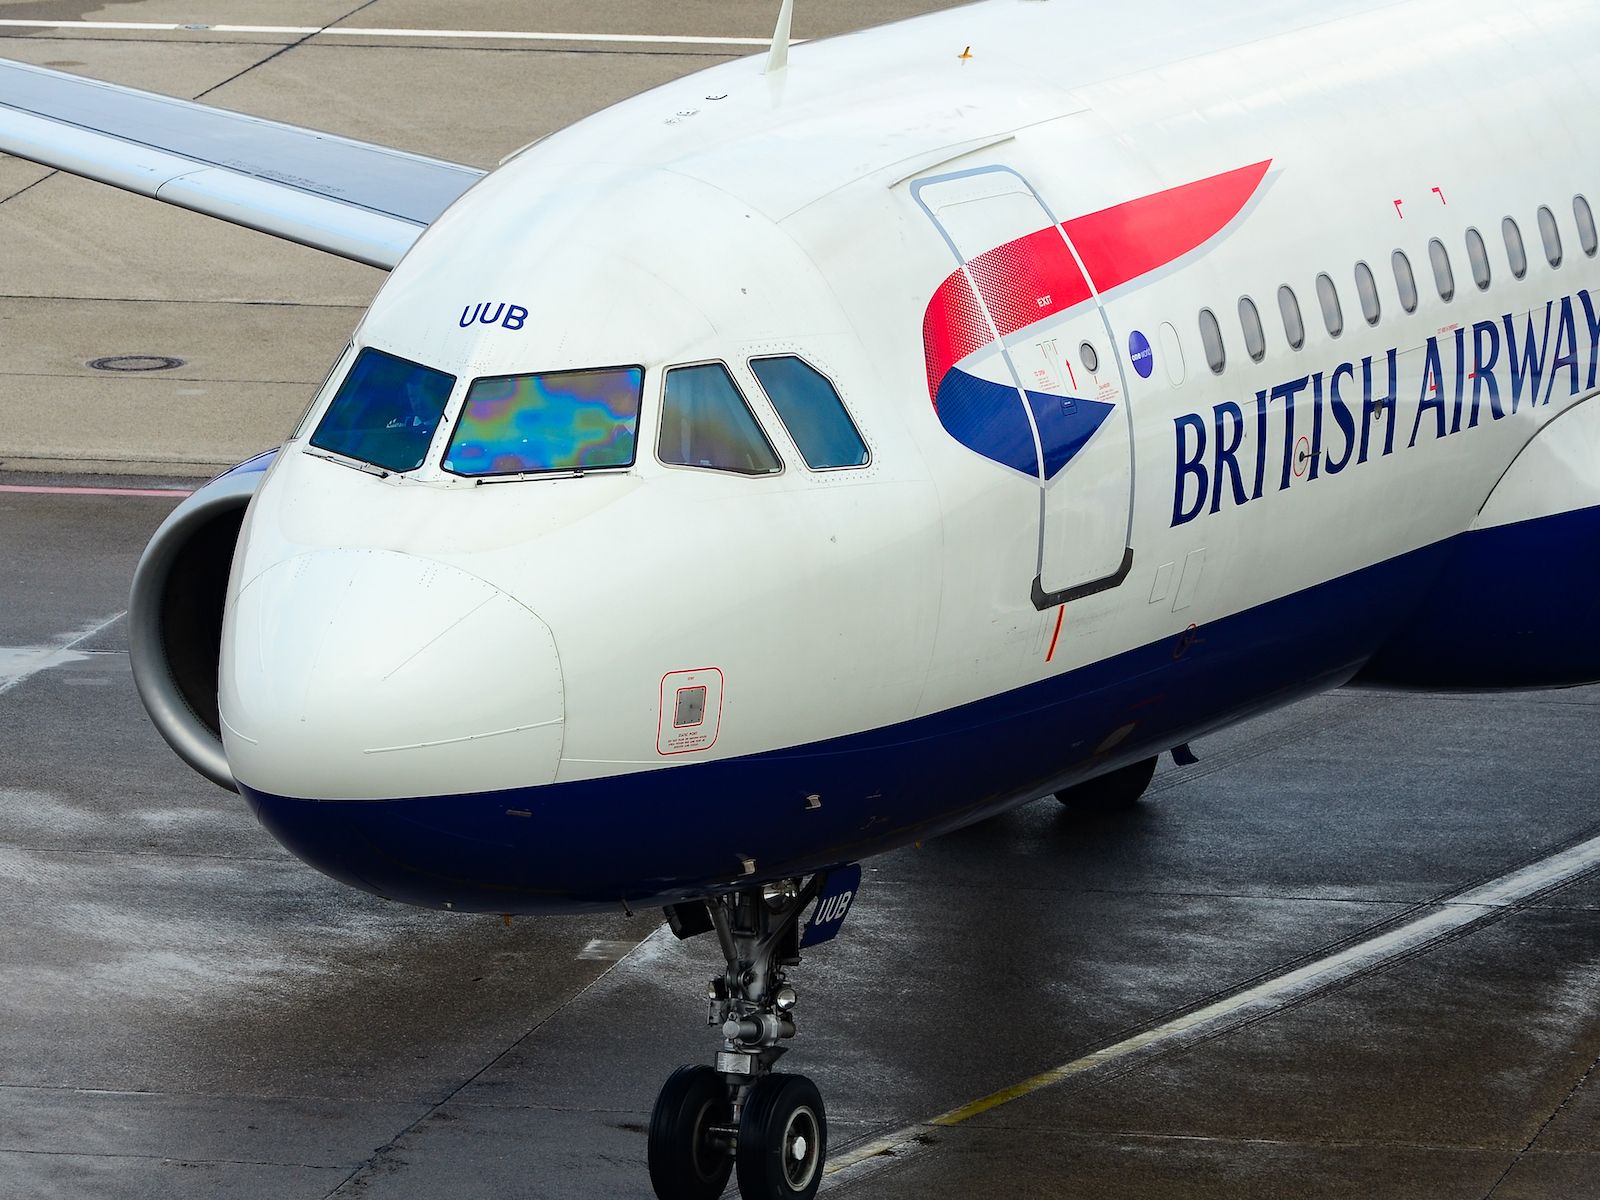 Passengers fell ill on a British Airways flight from BCN to LHR